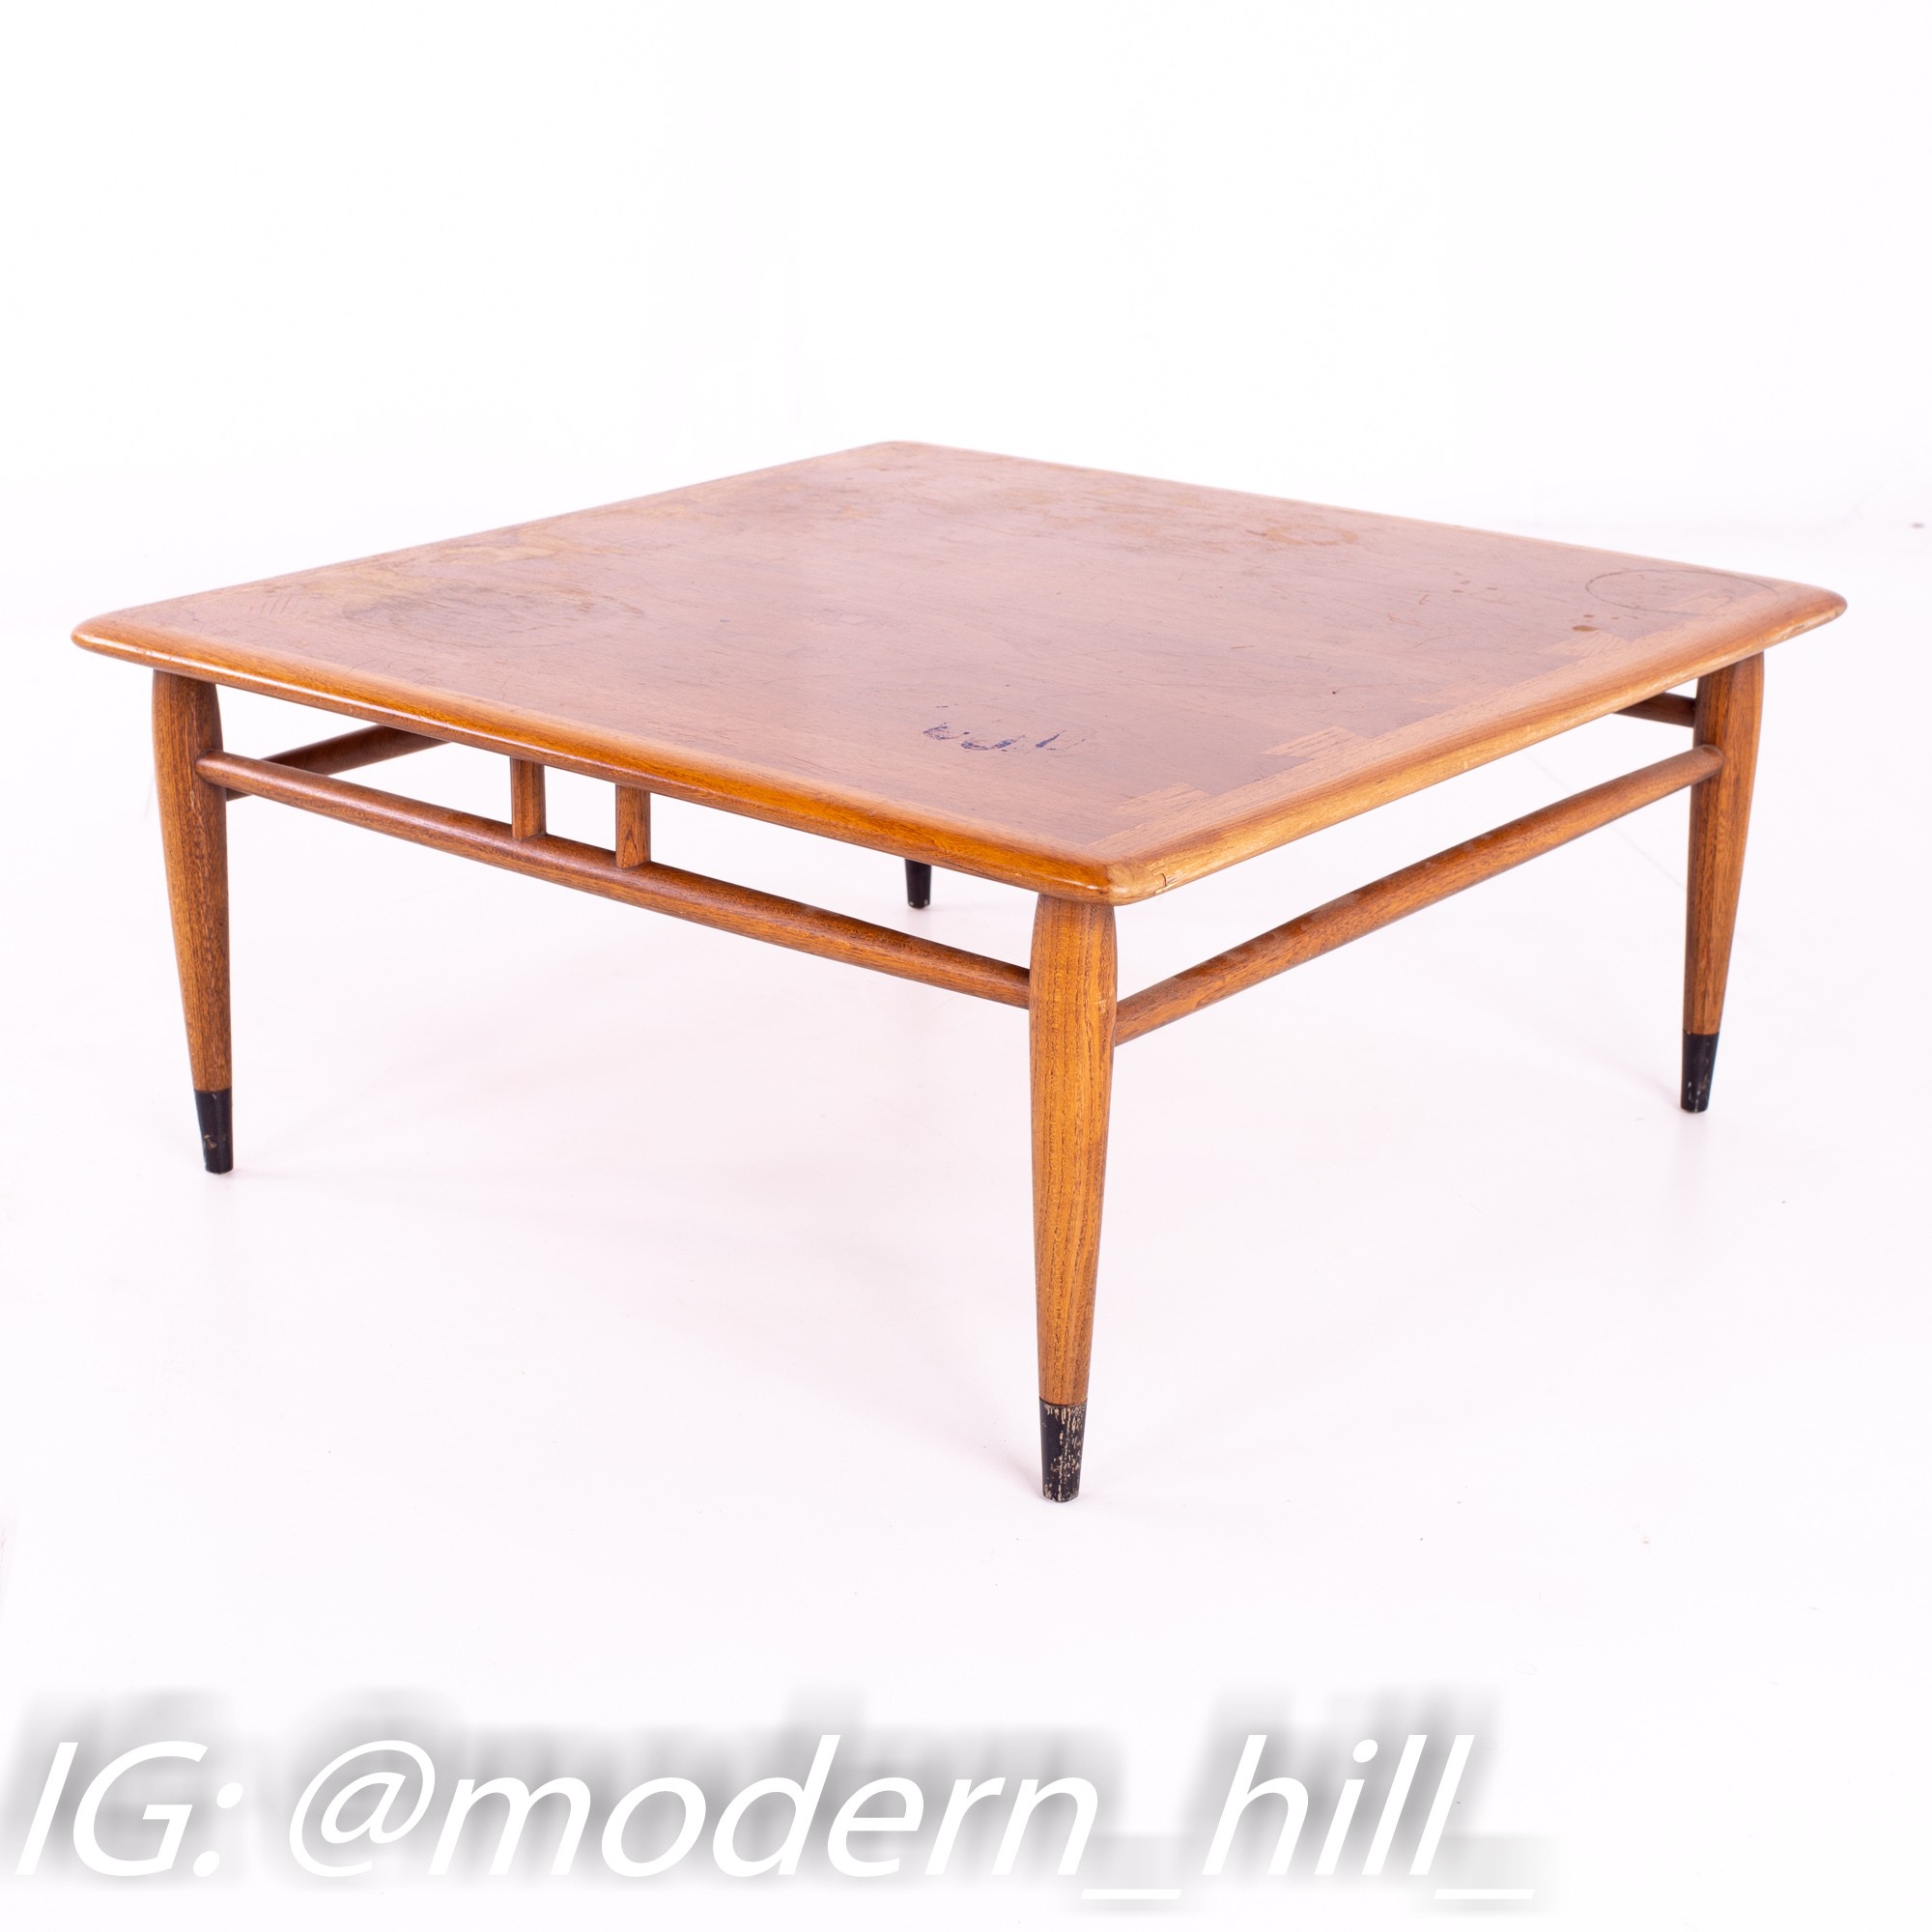 Andre Bus for Lane Acclaim Mid Century Square Walnut and Oak Dovetail Side End Coffee Table